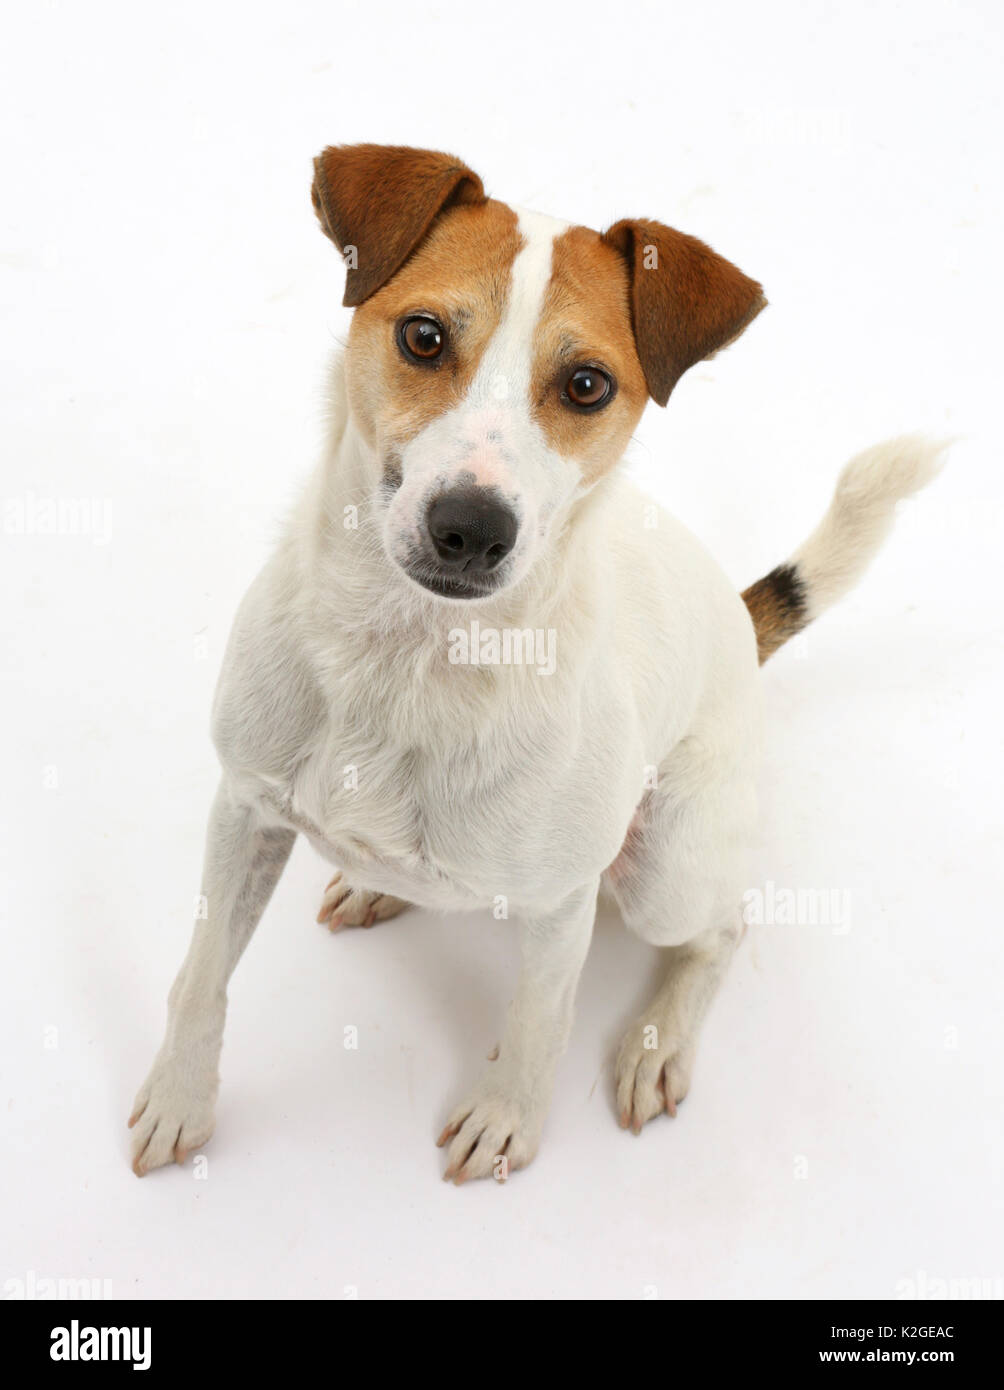 Jack Russell Terrier, Milo, age 5 years, sitting and looking up Stock Photo  - Alamy